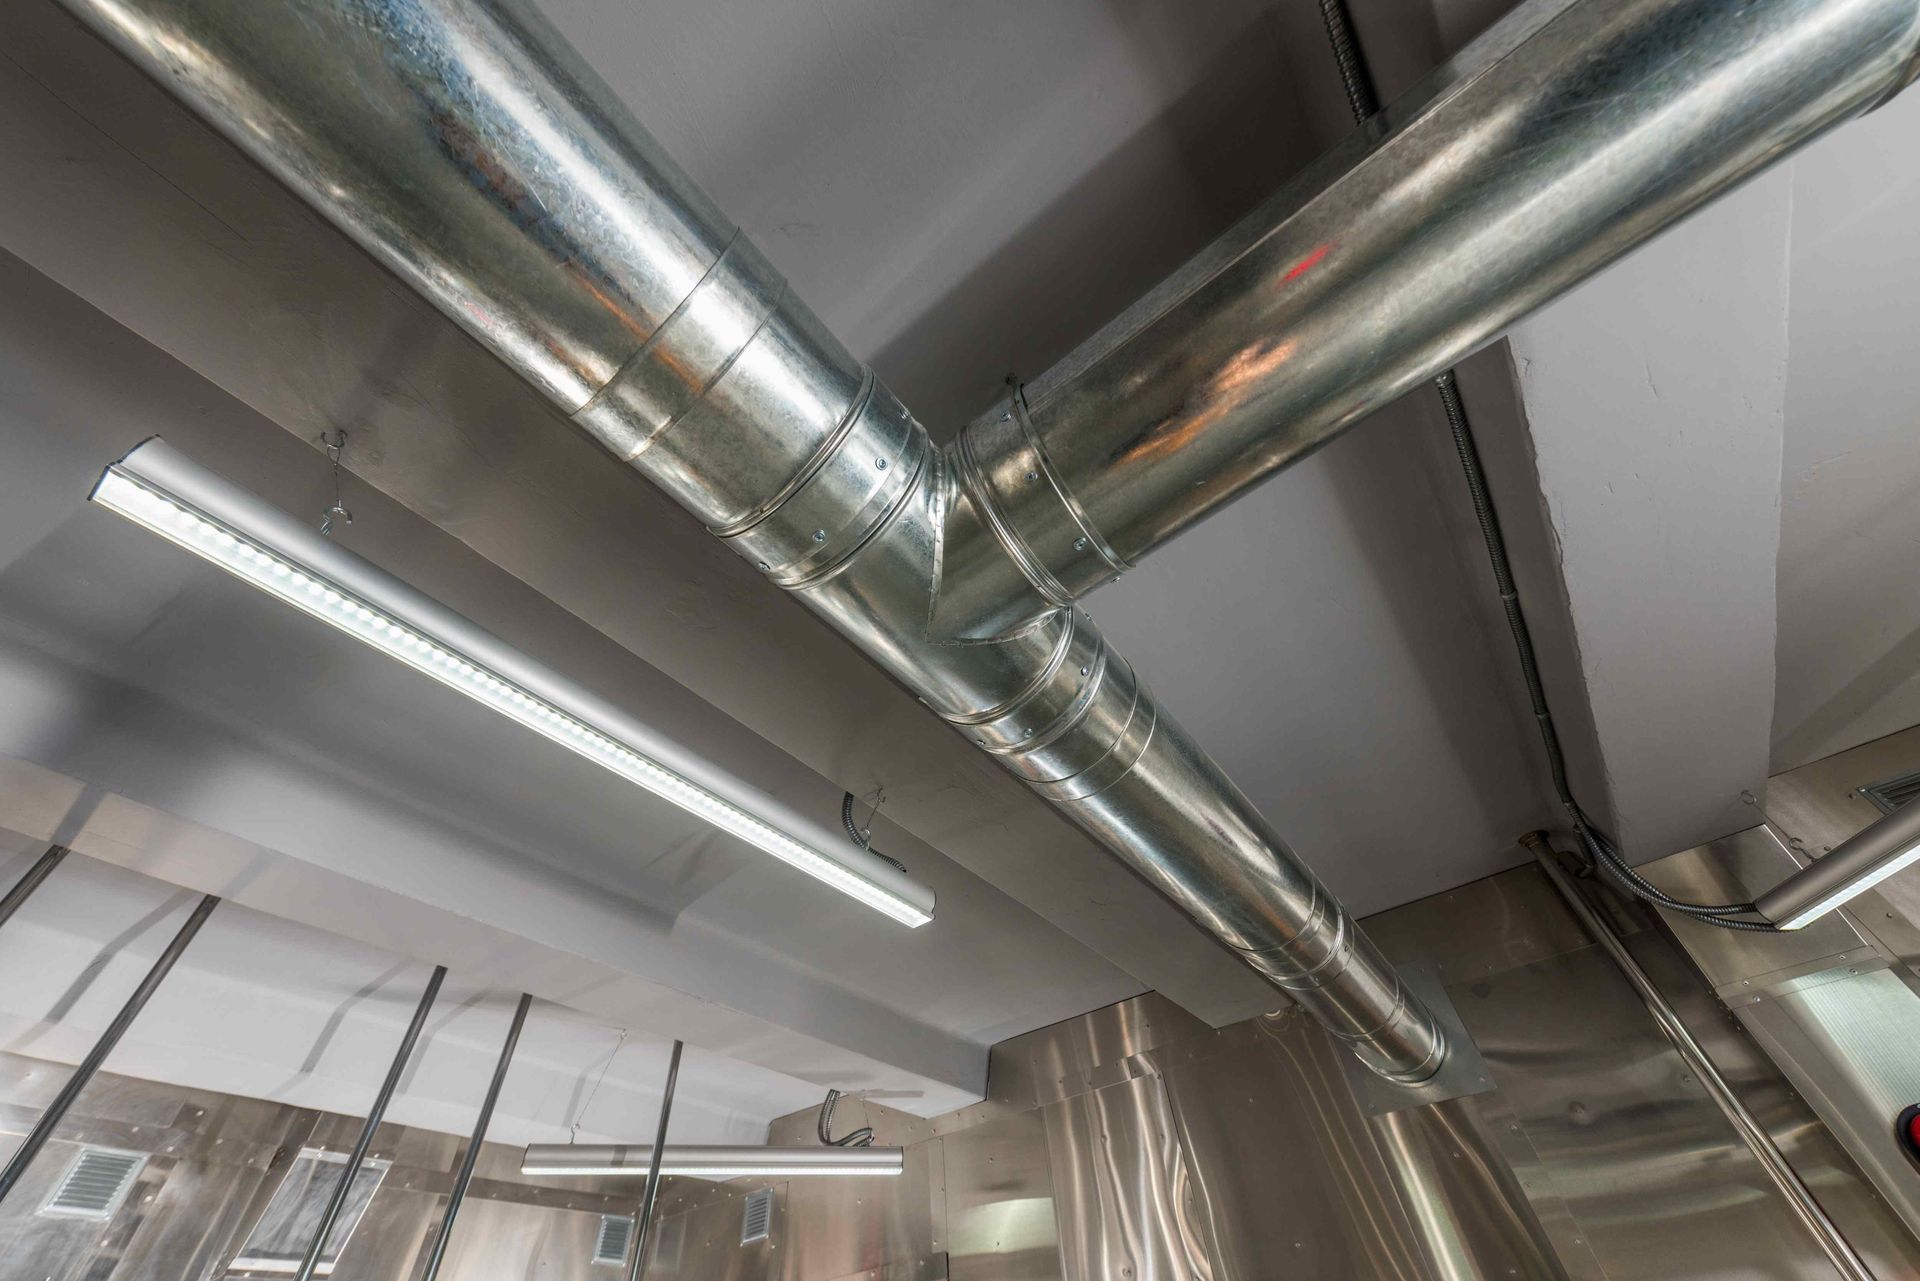 Air ducts on ceiling